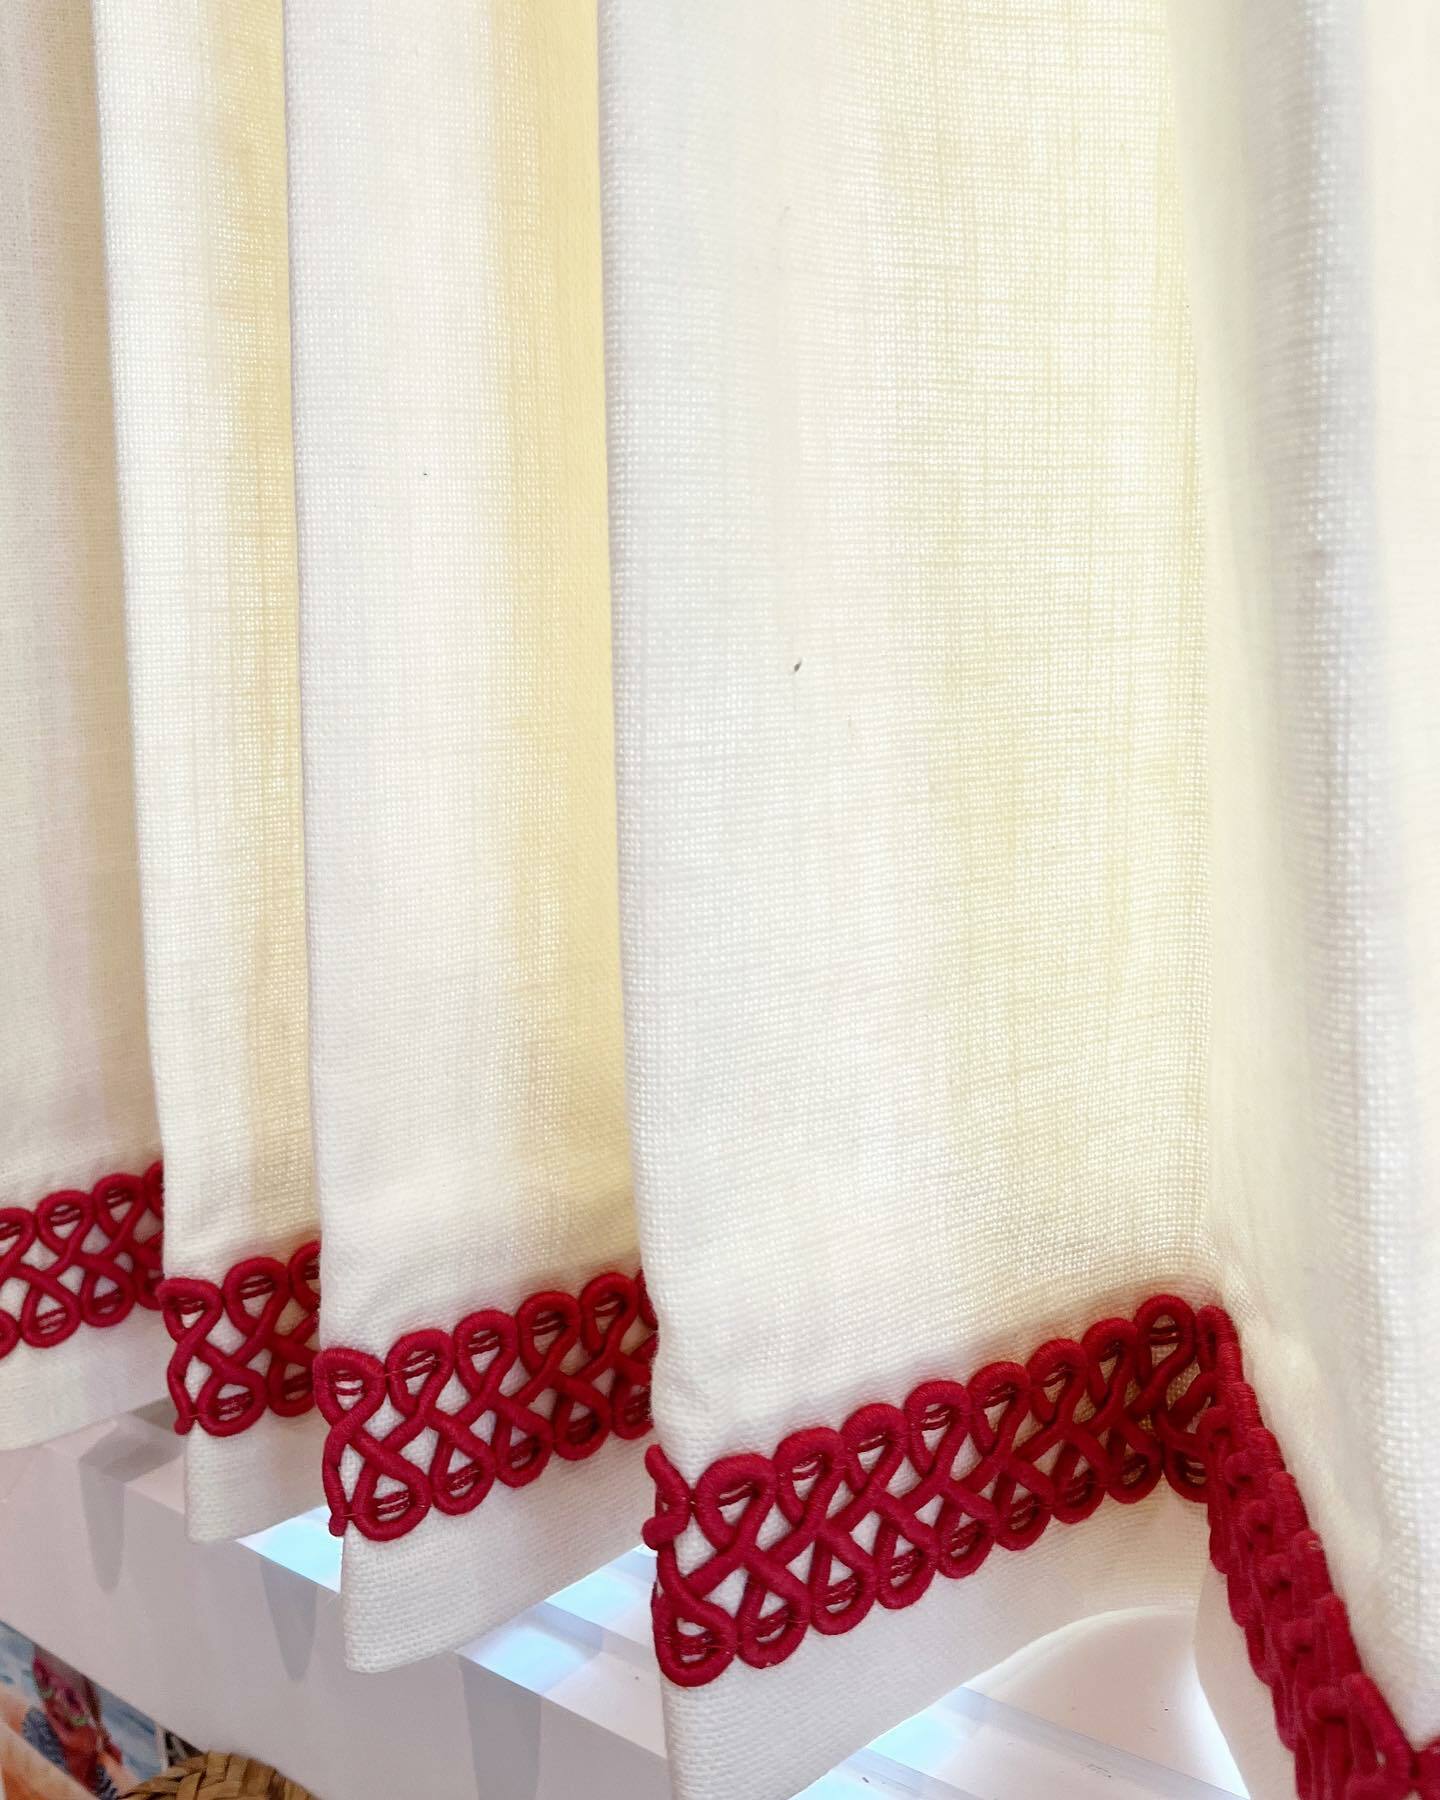 A close-up of a curtain with red trim, adding a touch of elegance to the room's decor.